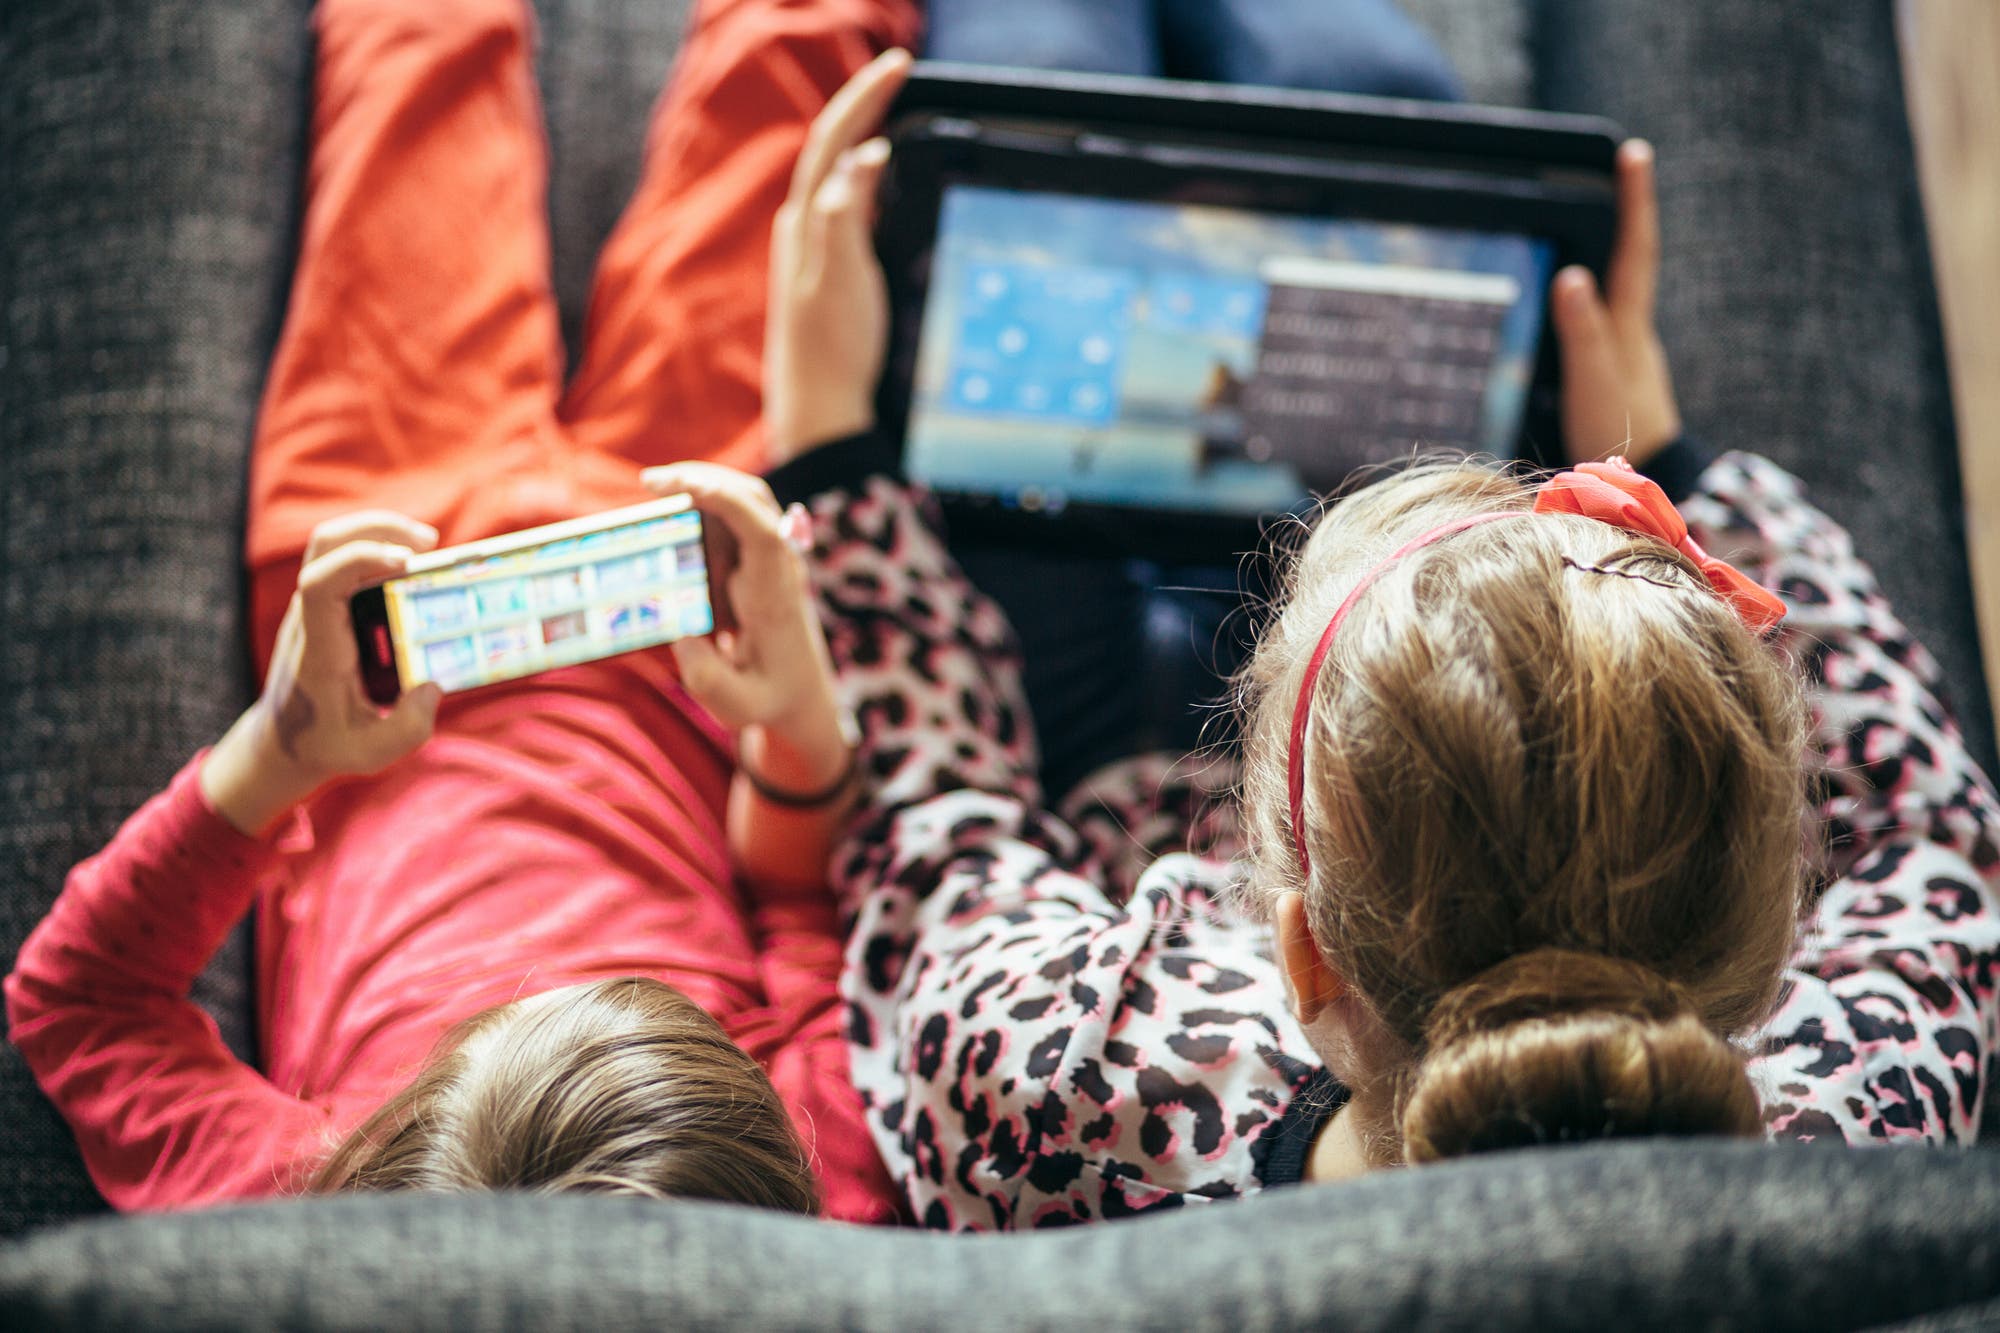 Digital resources to accompany and care for children in the use of technology during quarantine